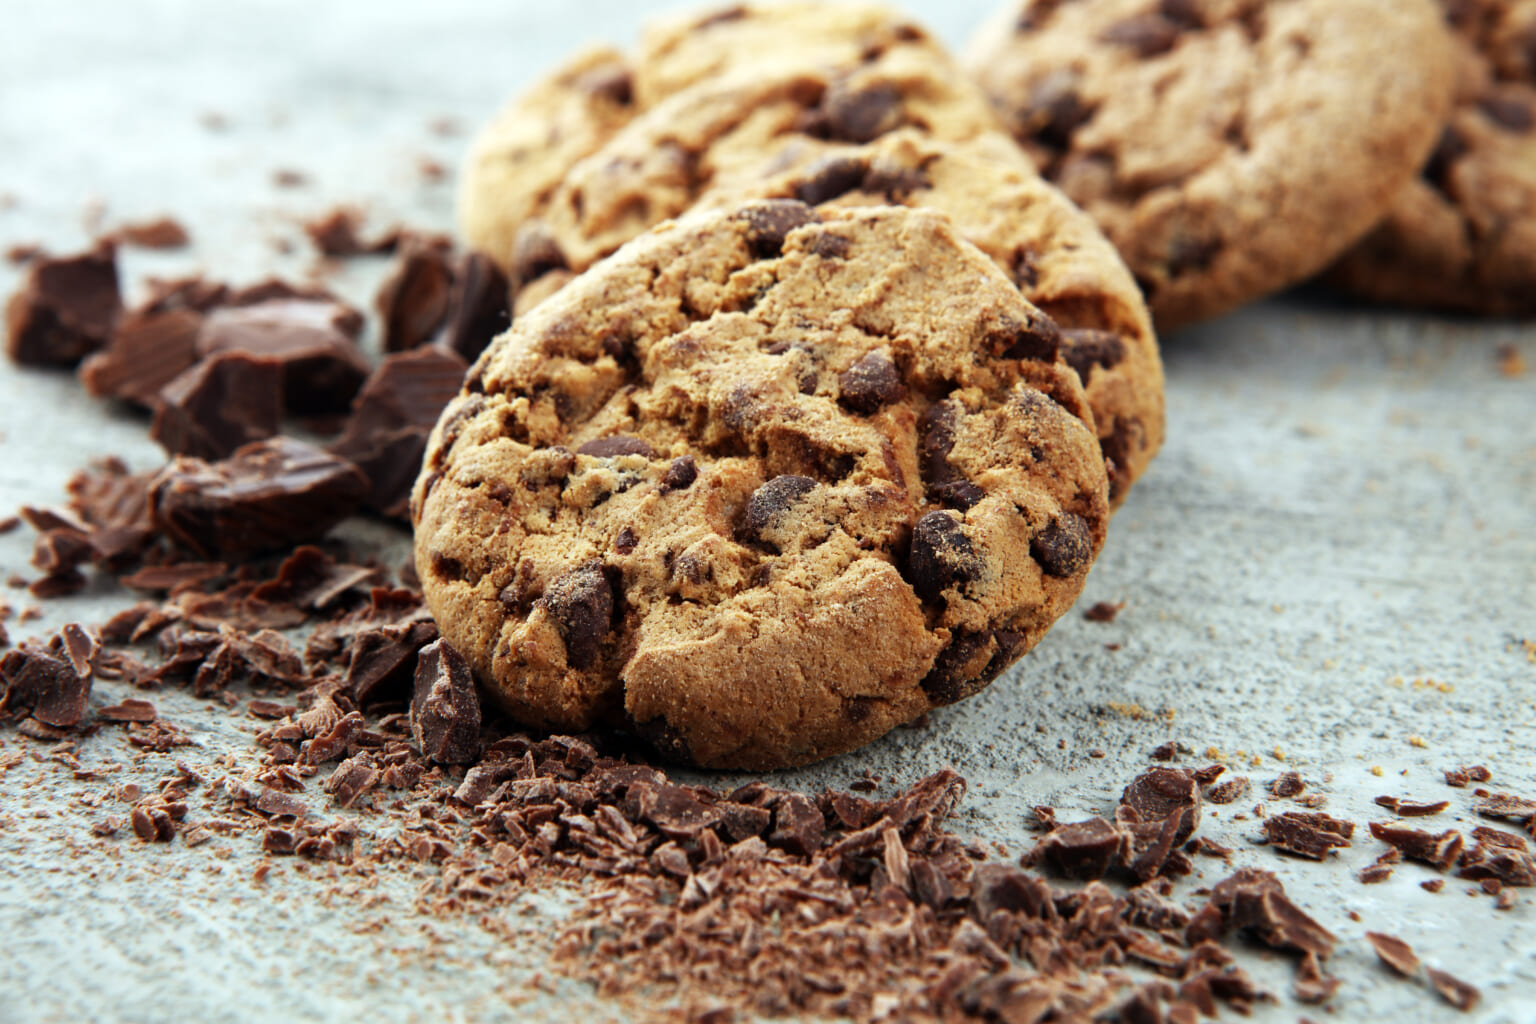 It's National Chocolate Chip Cookie Day! Here's the origin story and